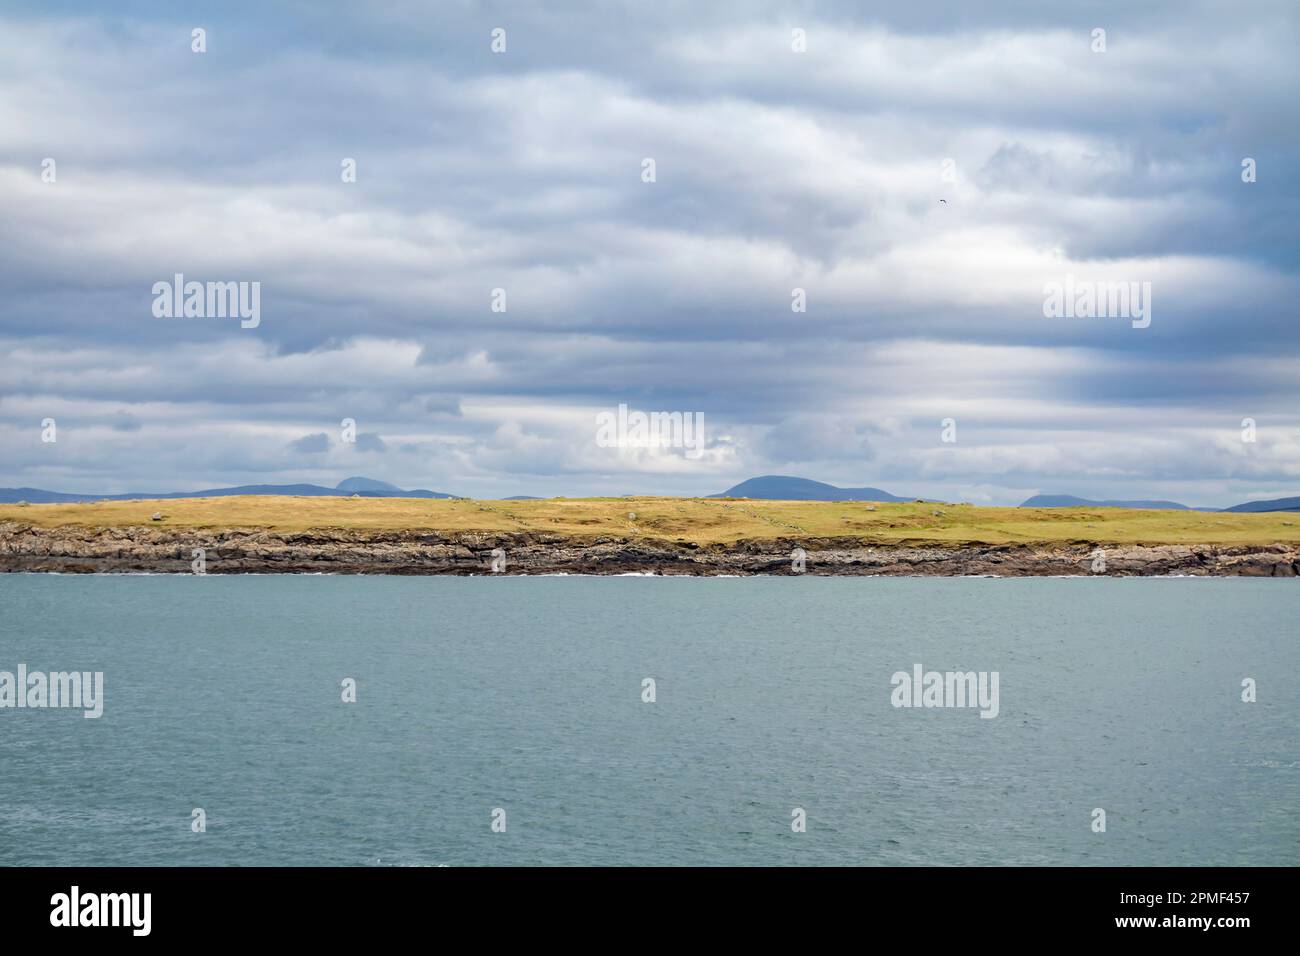 Inishkeel seen from the new viewpoint in Portnoo - Donegal, Ireland Stock Photo